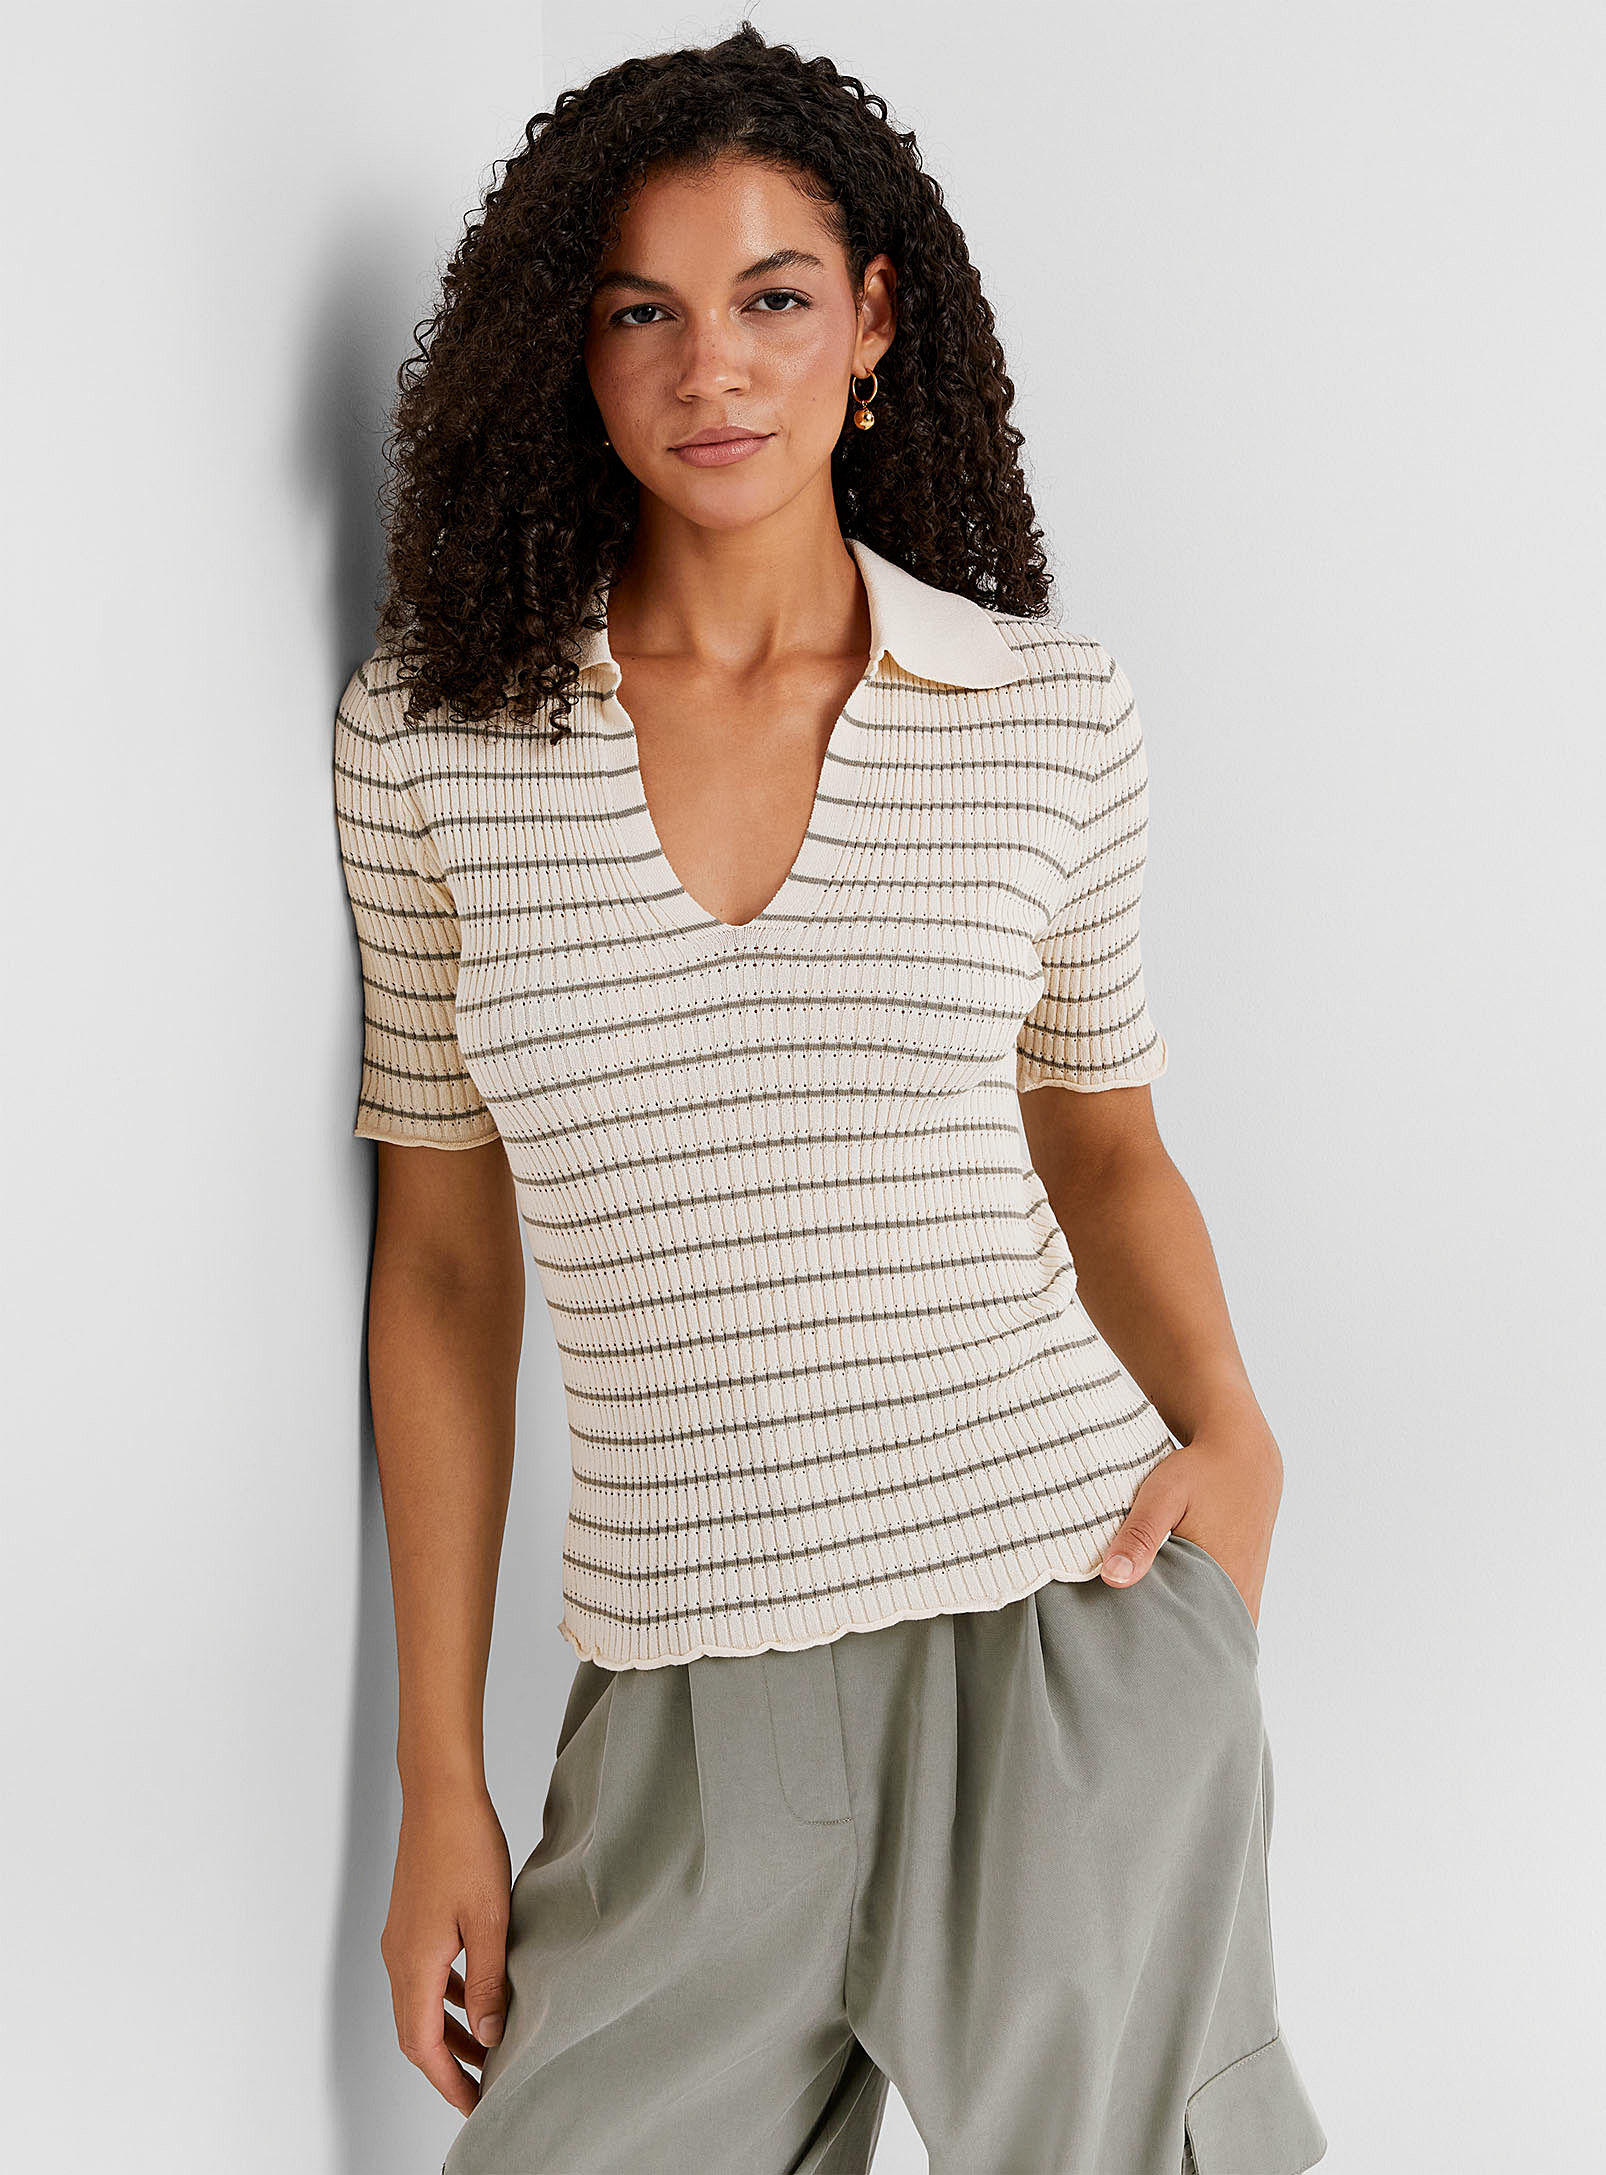 Soaked Luxury - Women's Johnny collar textured striped sweater